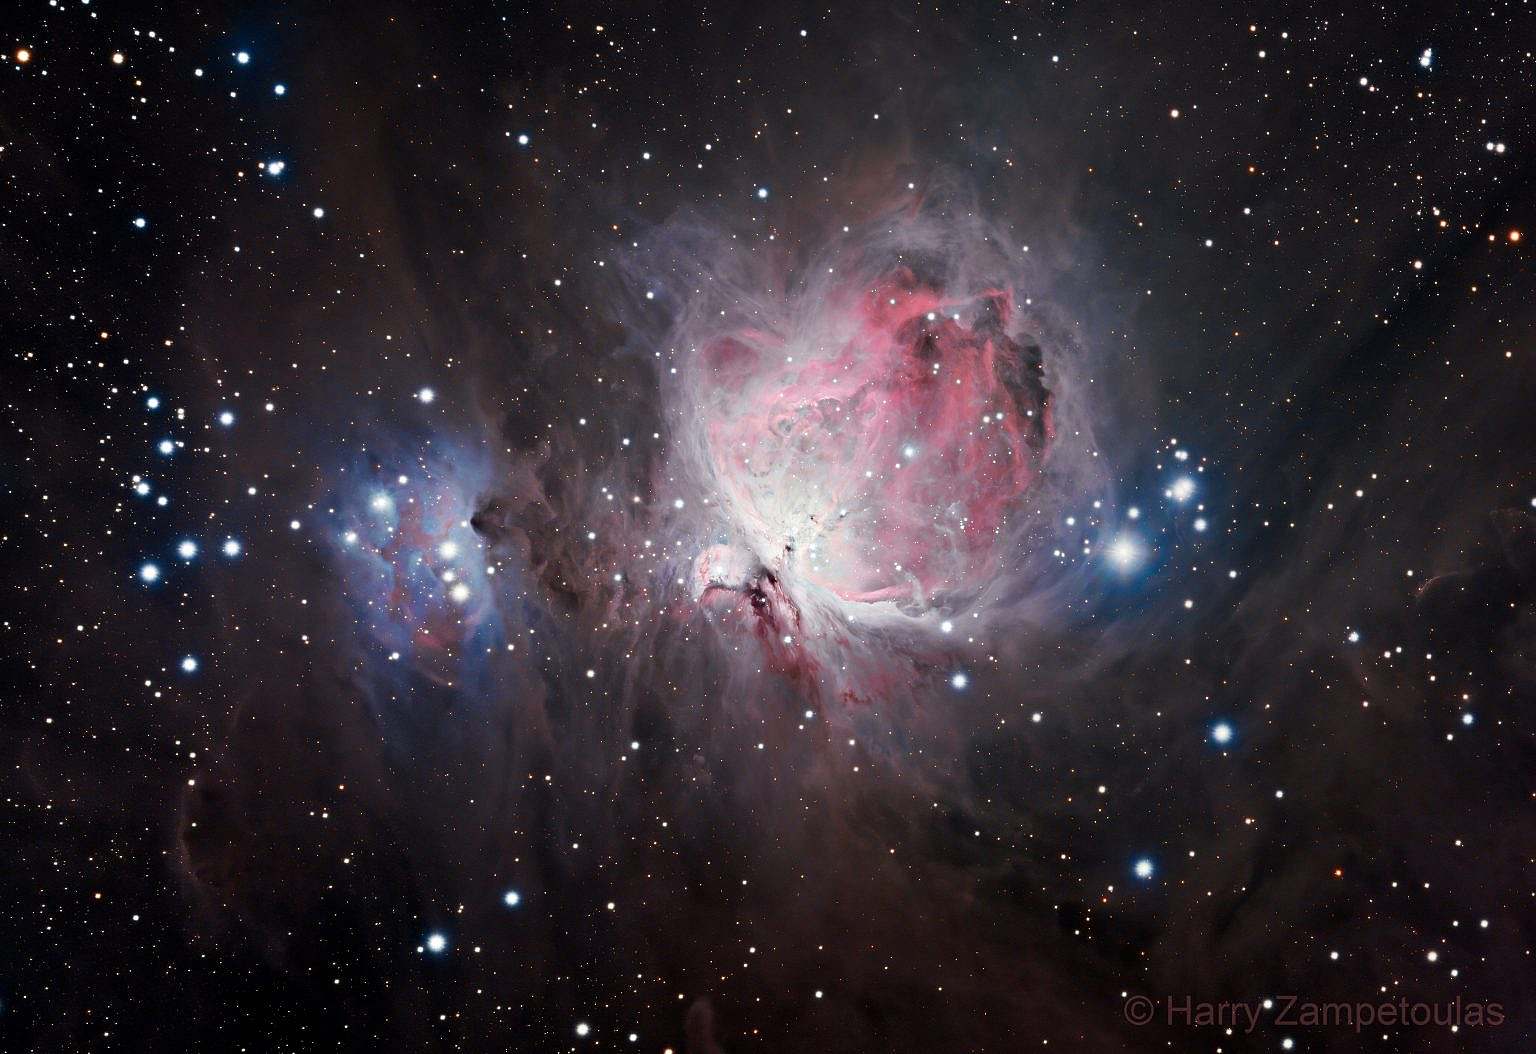 m42-the-great-orion-nebula-1536x1054 M42 - The Great Orion Nebula - Astrophotography - Rhodes, Greece 